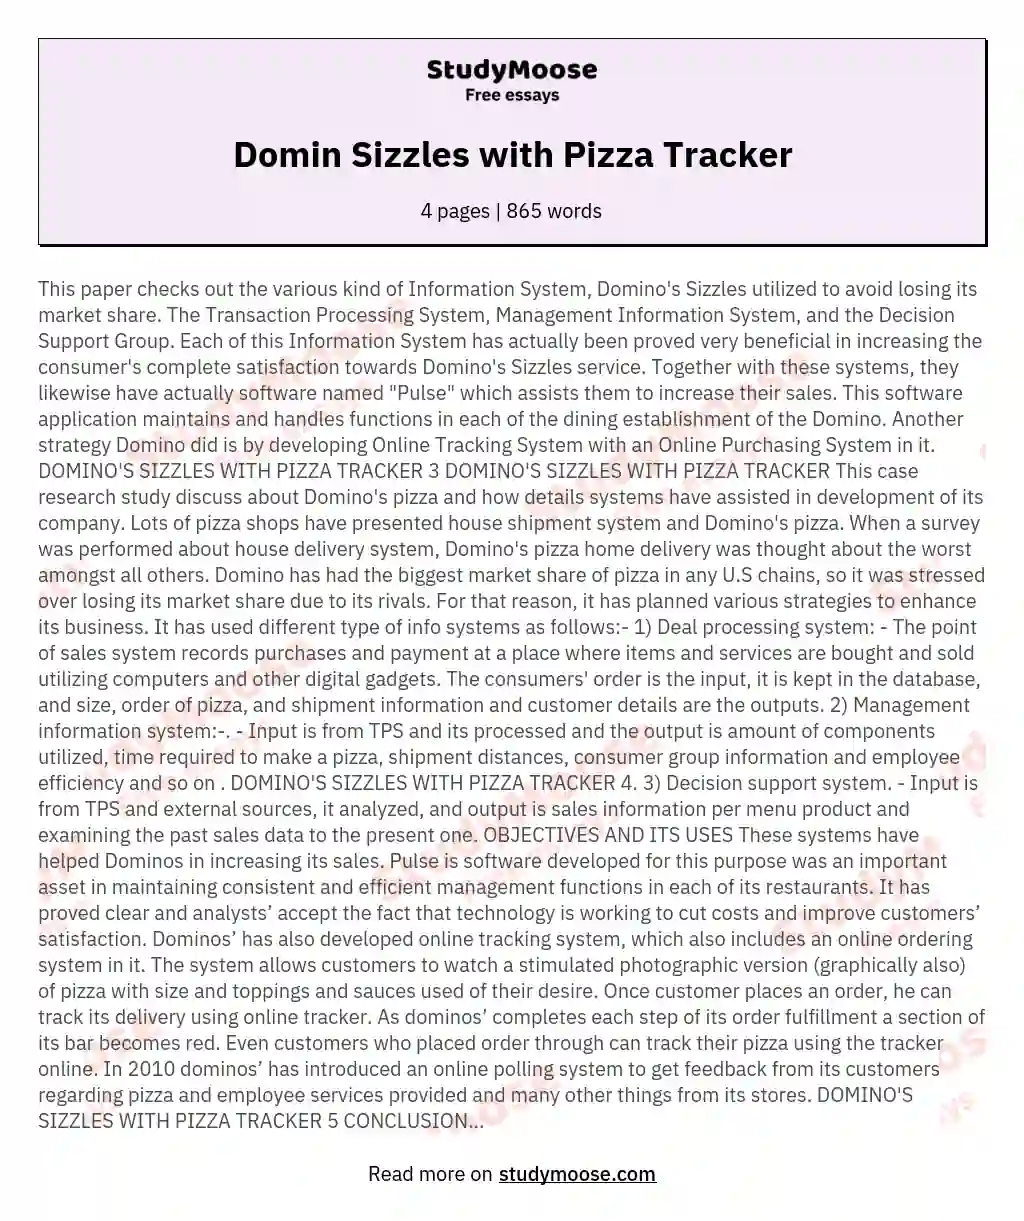 Domin Sizzles with Pizza Tracker